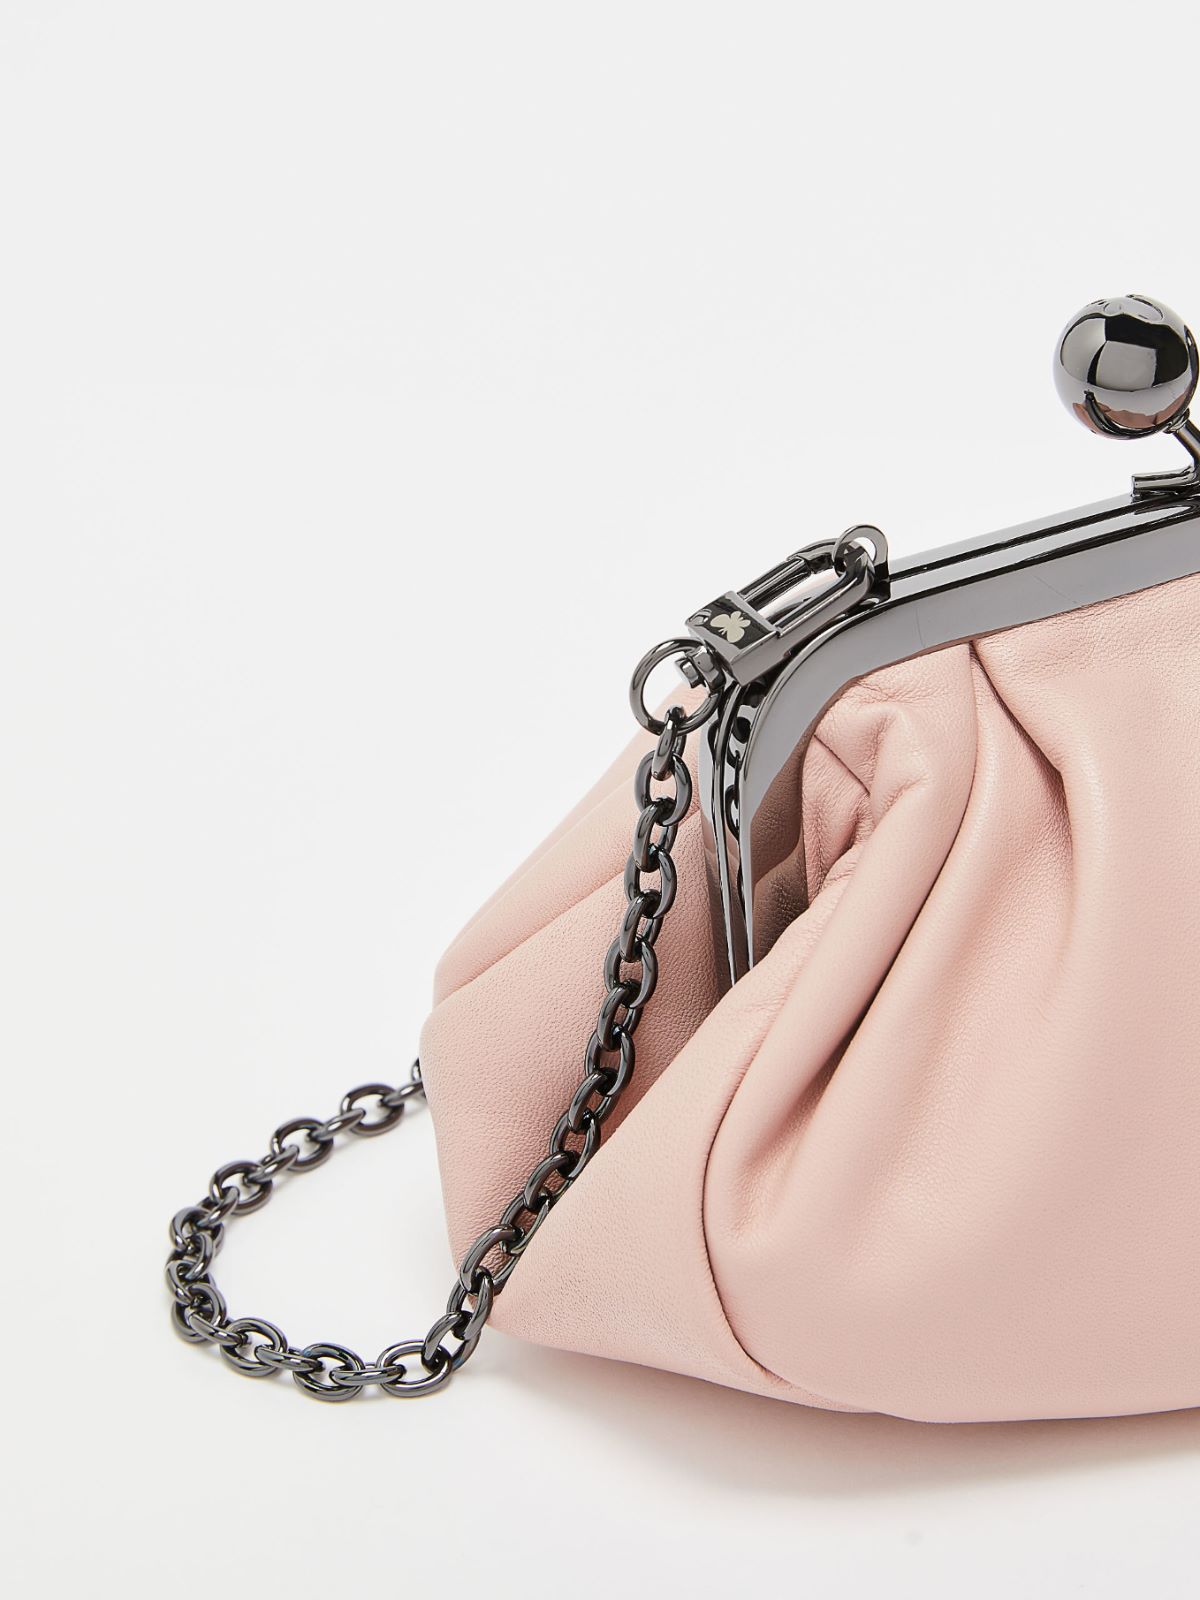 Small leather Pasticcino Bag - ANTIQUE ROSE - Weekend Max Mara - 4